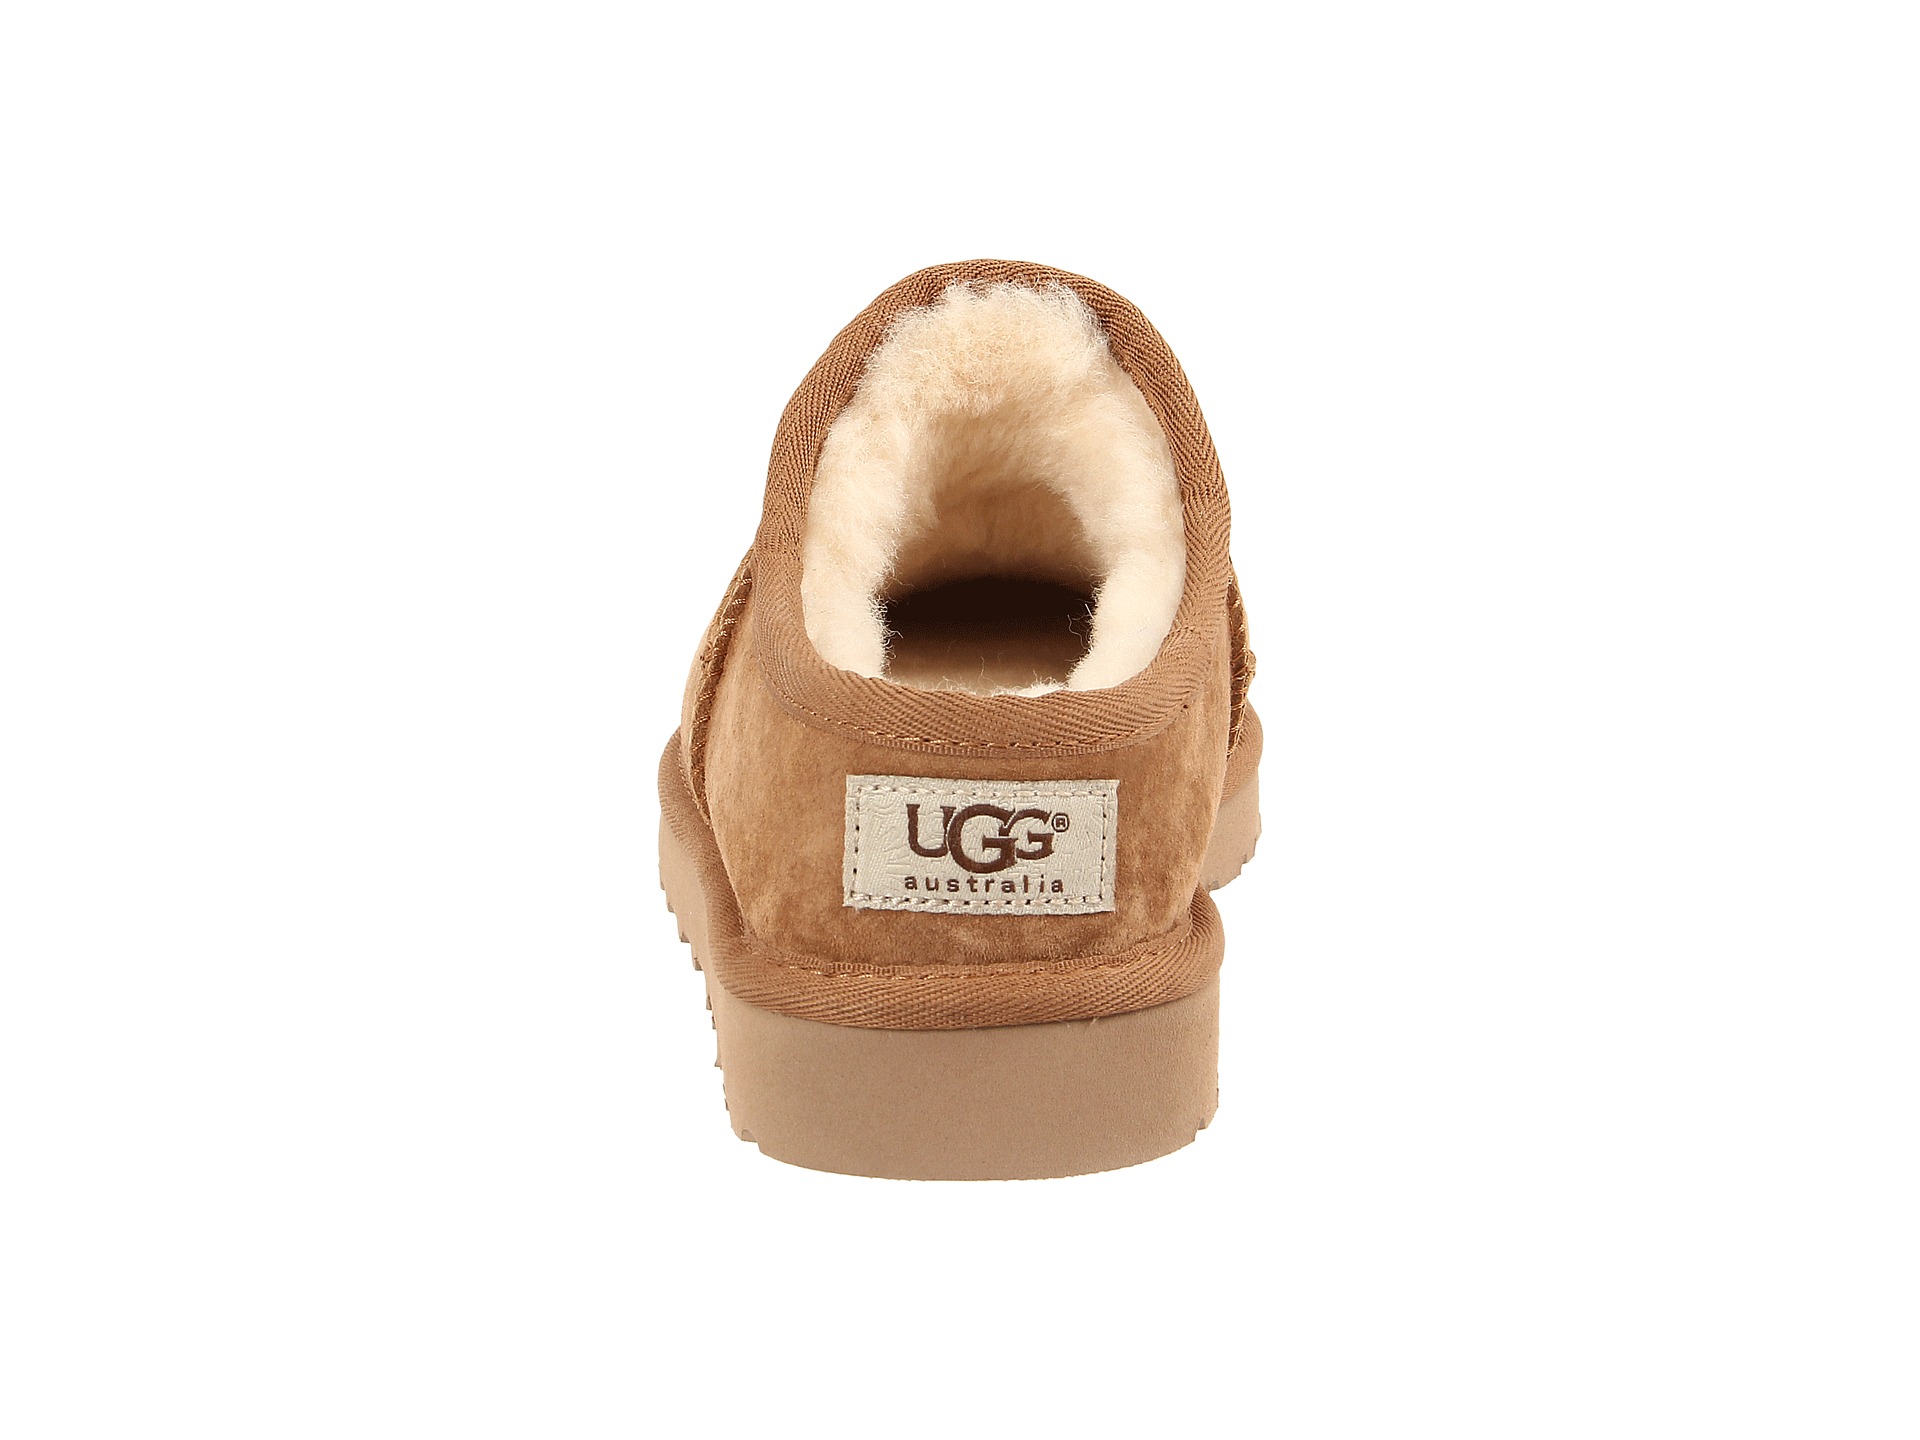 UGG Classic Slipper Chestnut Suede - Zappos.com Free Shipping BOTH Ways